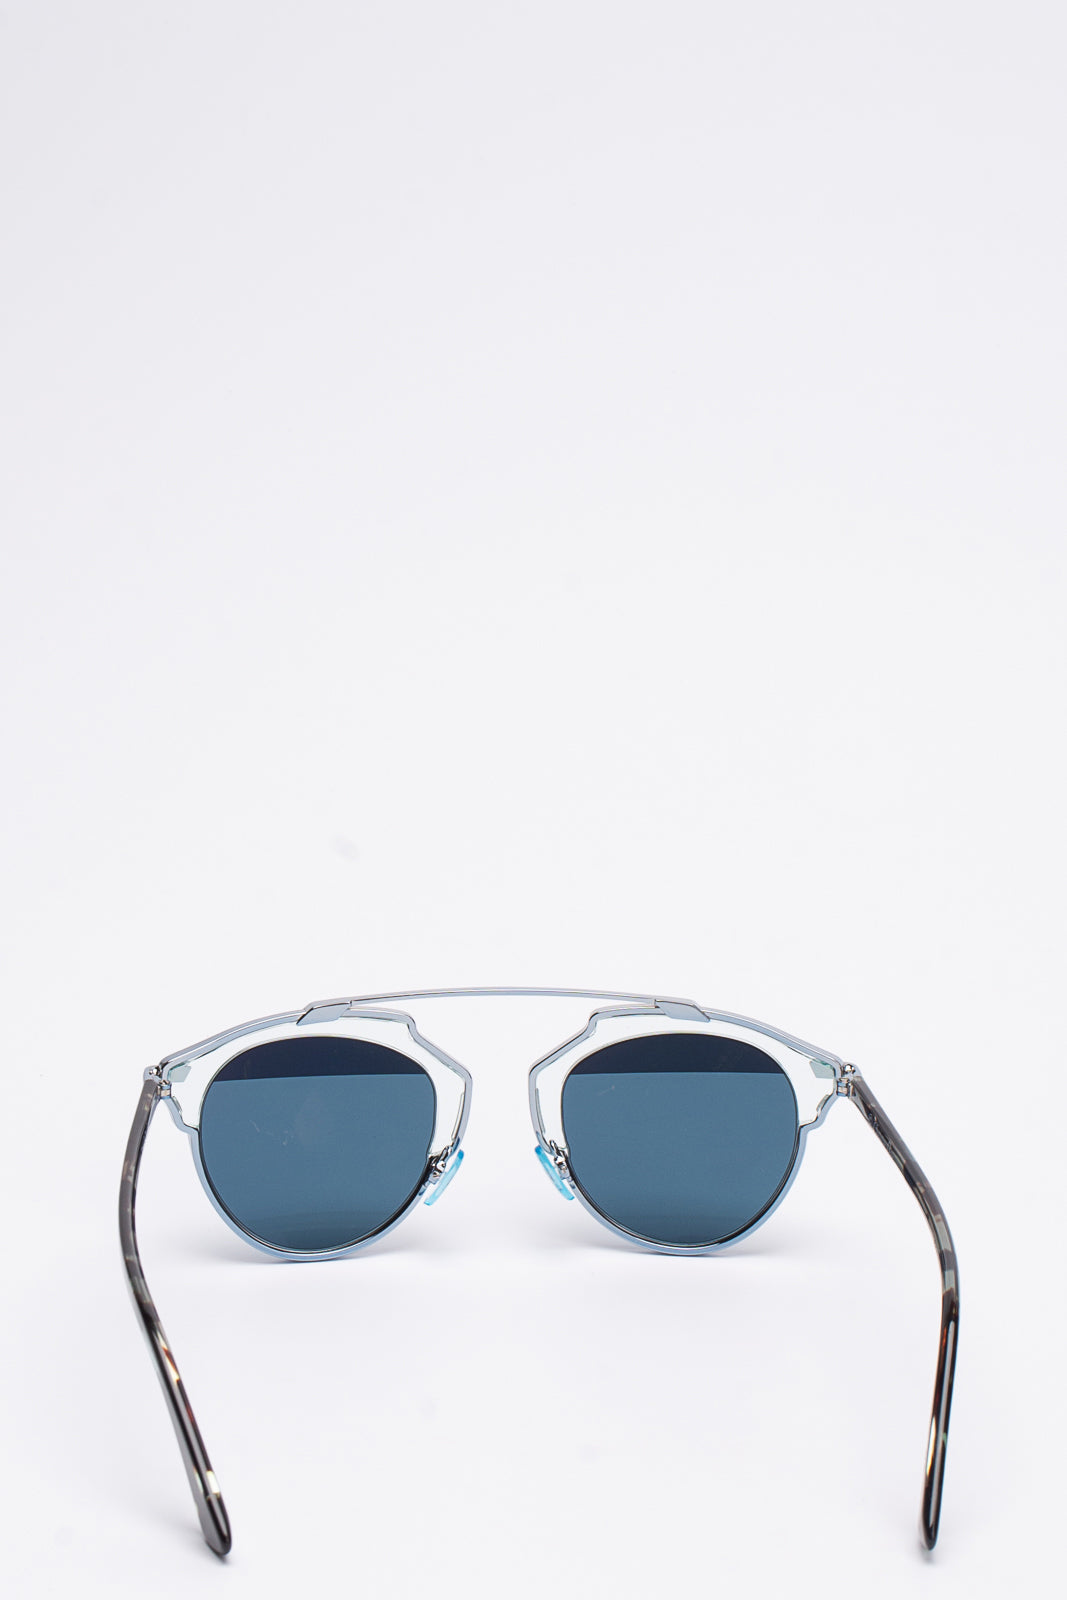 Details more than 234 dior sunglasses model numbers